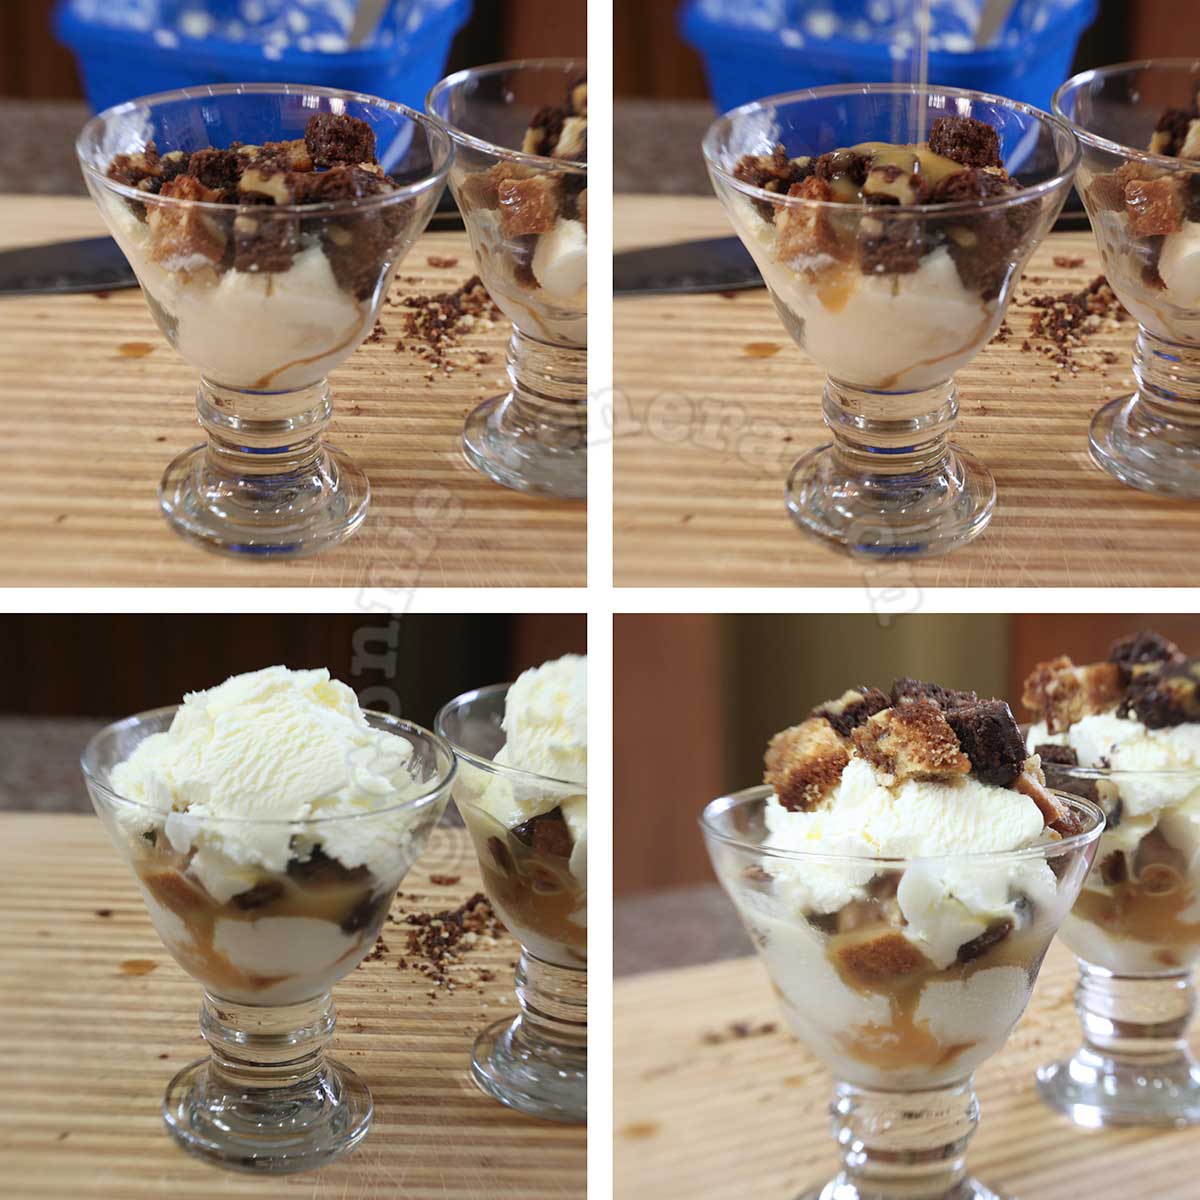 Assembling Kahlua-drenched brownies with vanilla ice cream in dessert glasses